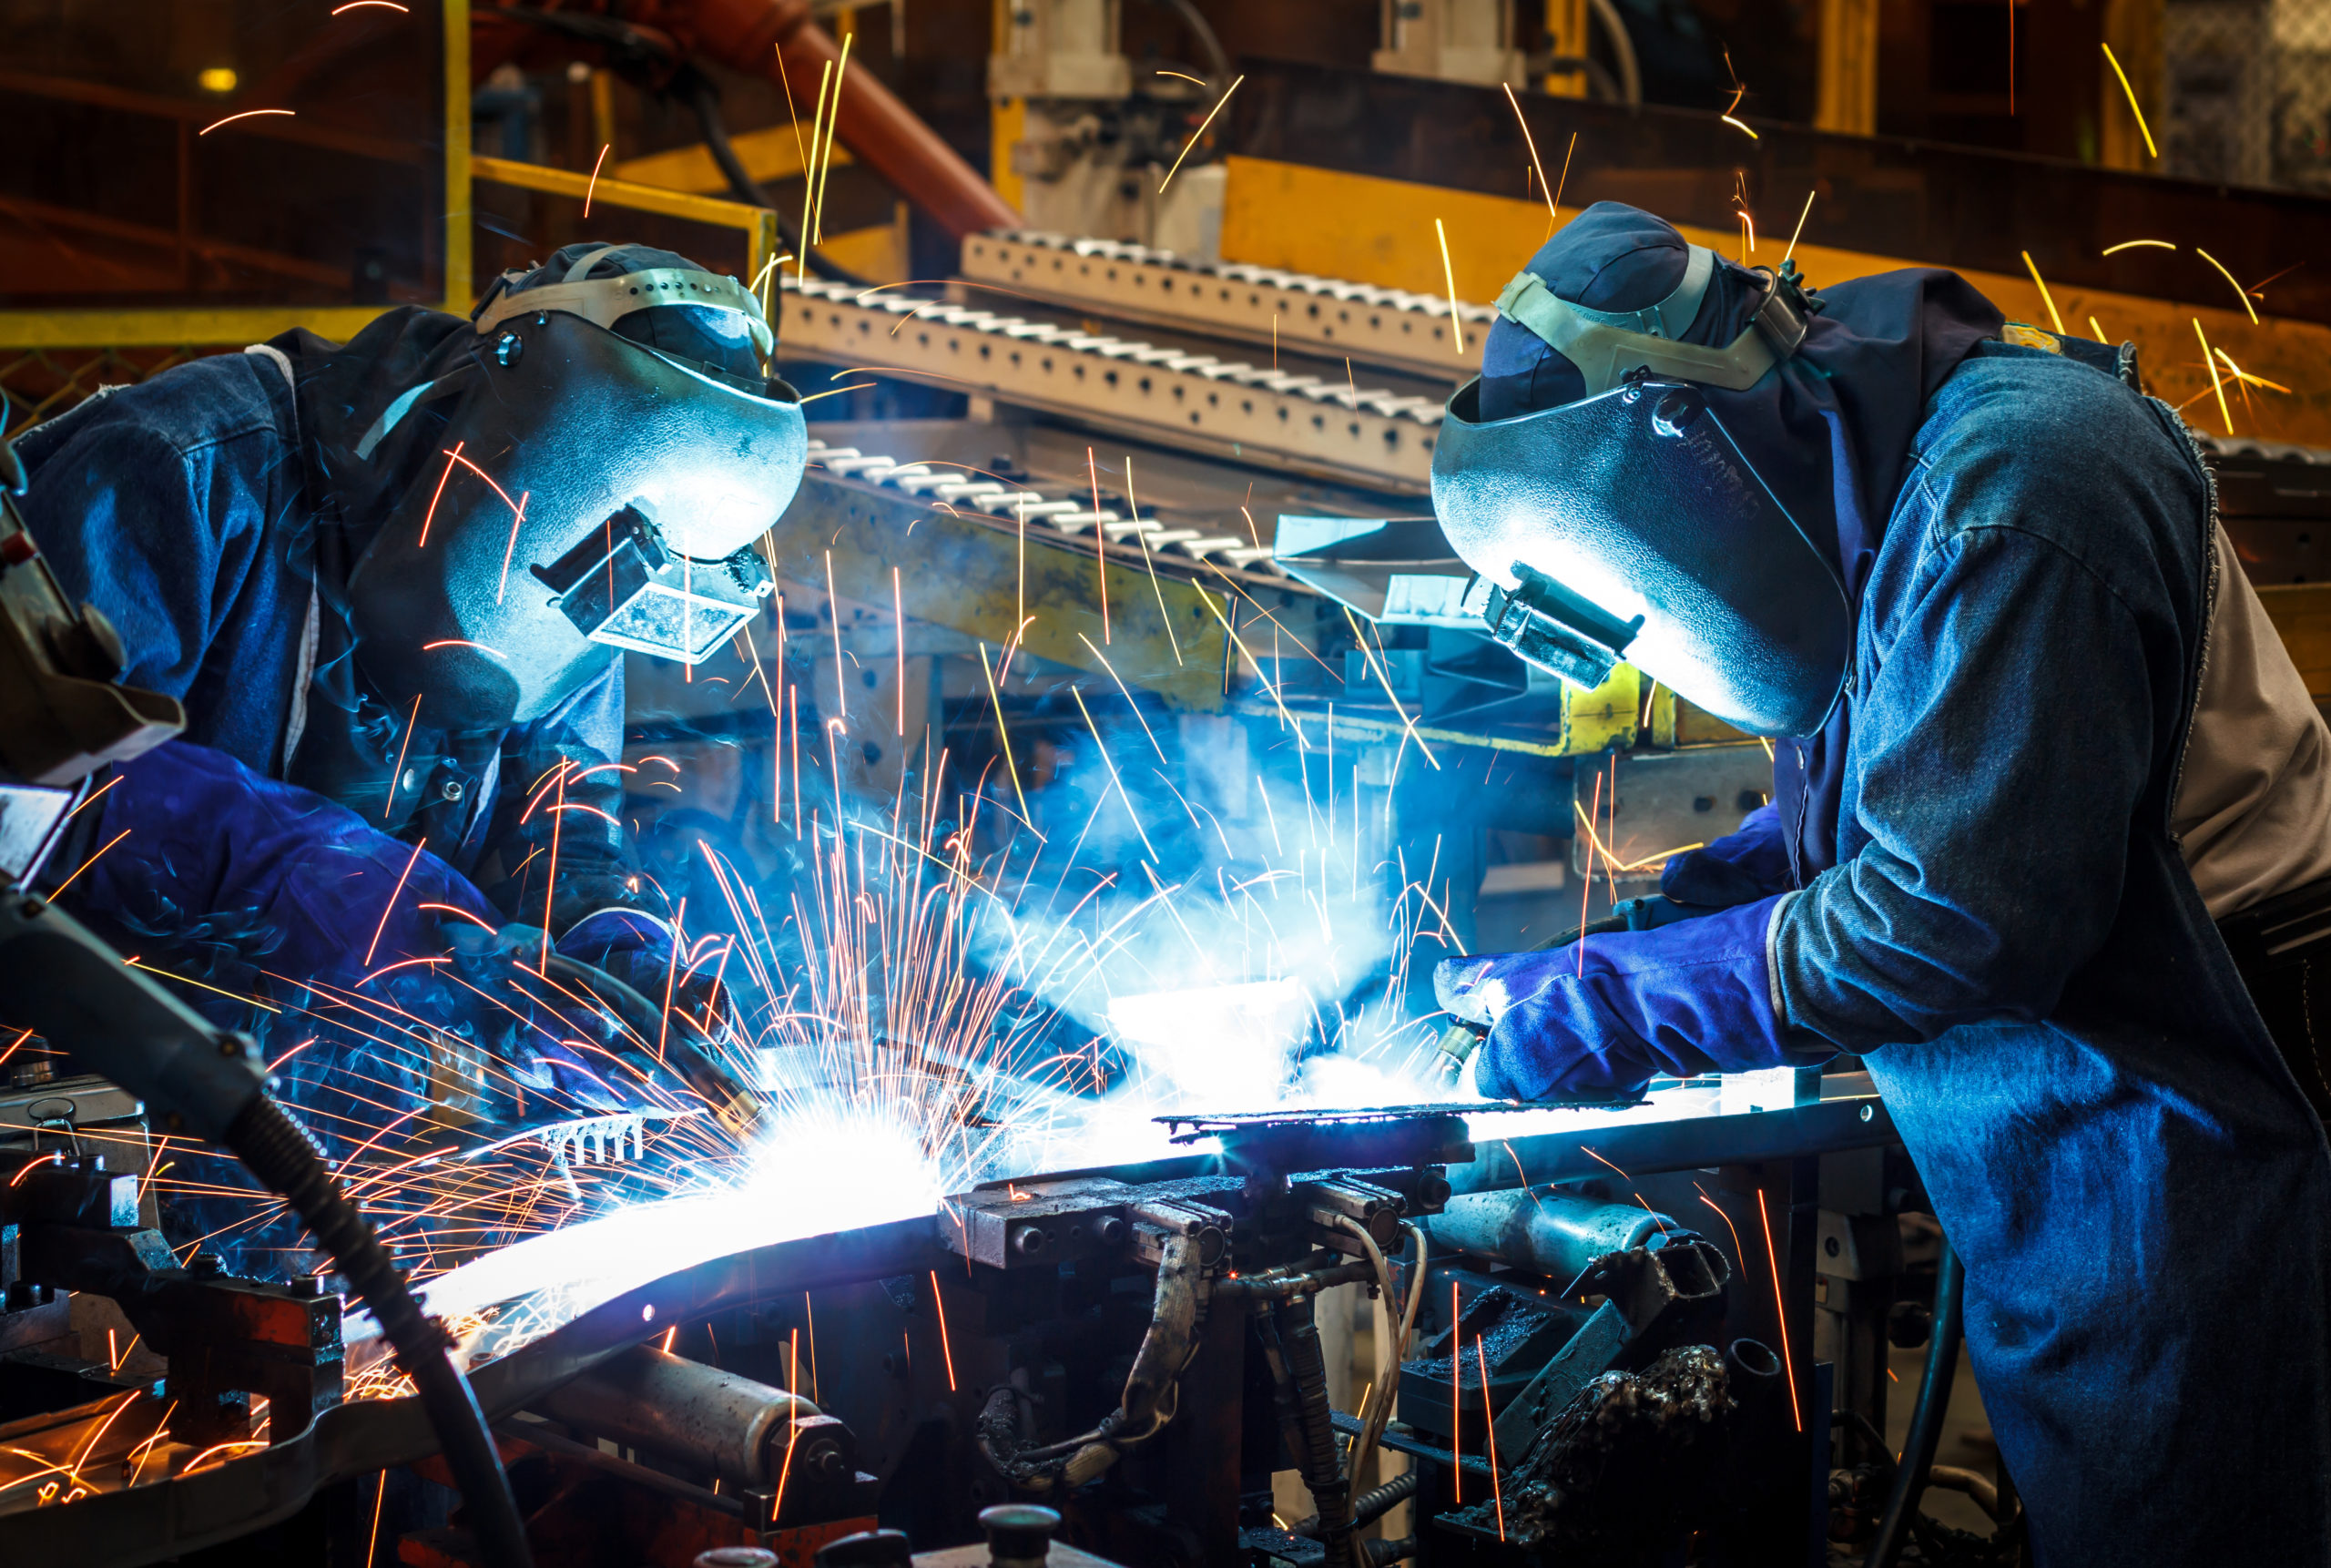 Specifications for the profession and professional job opportunities in welding